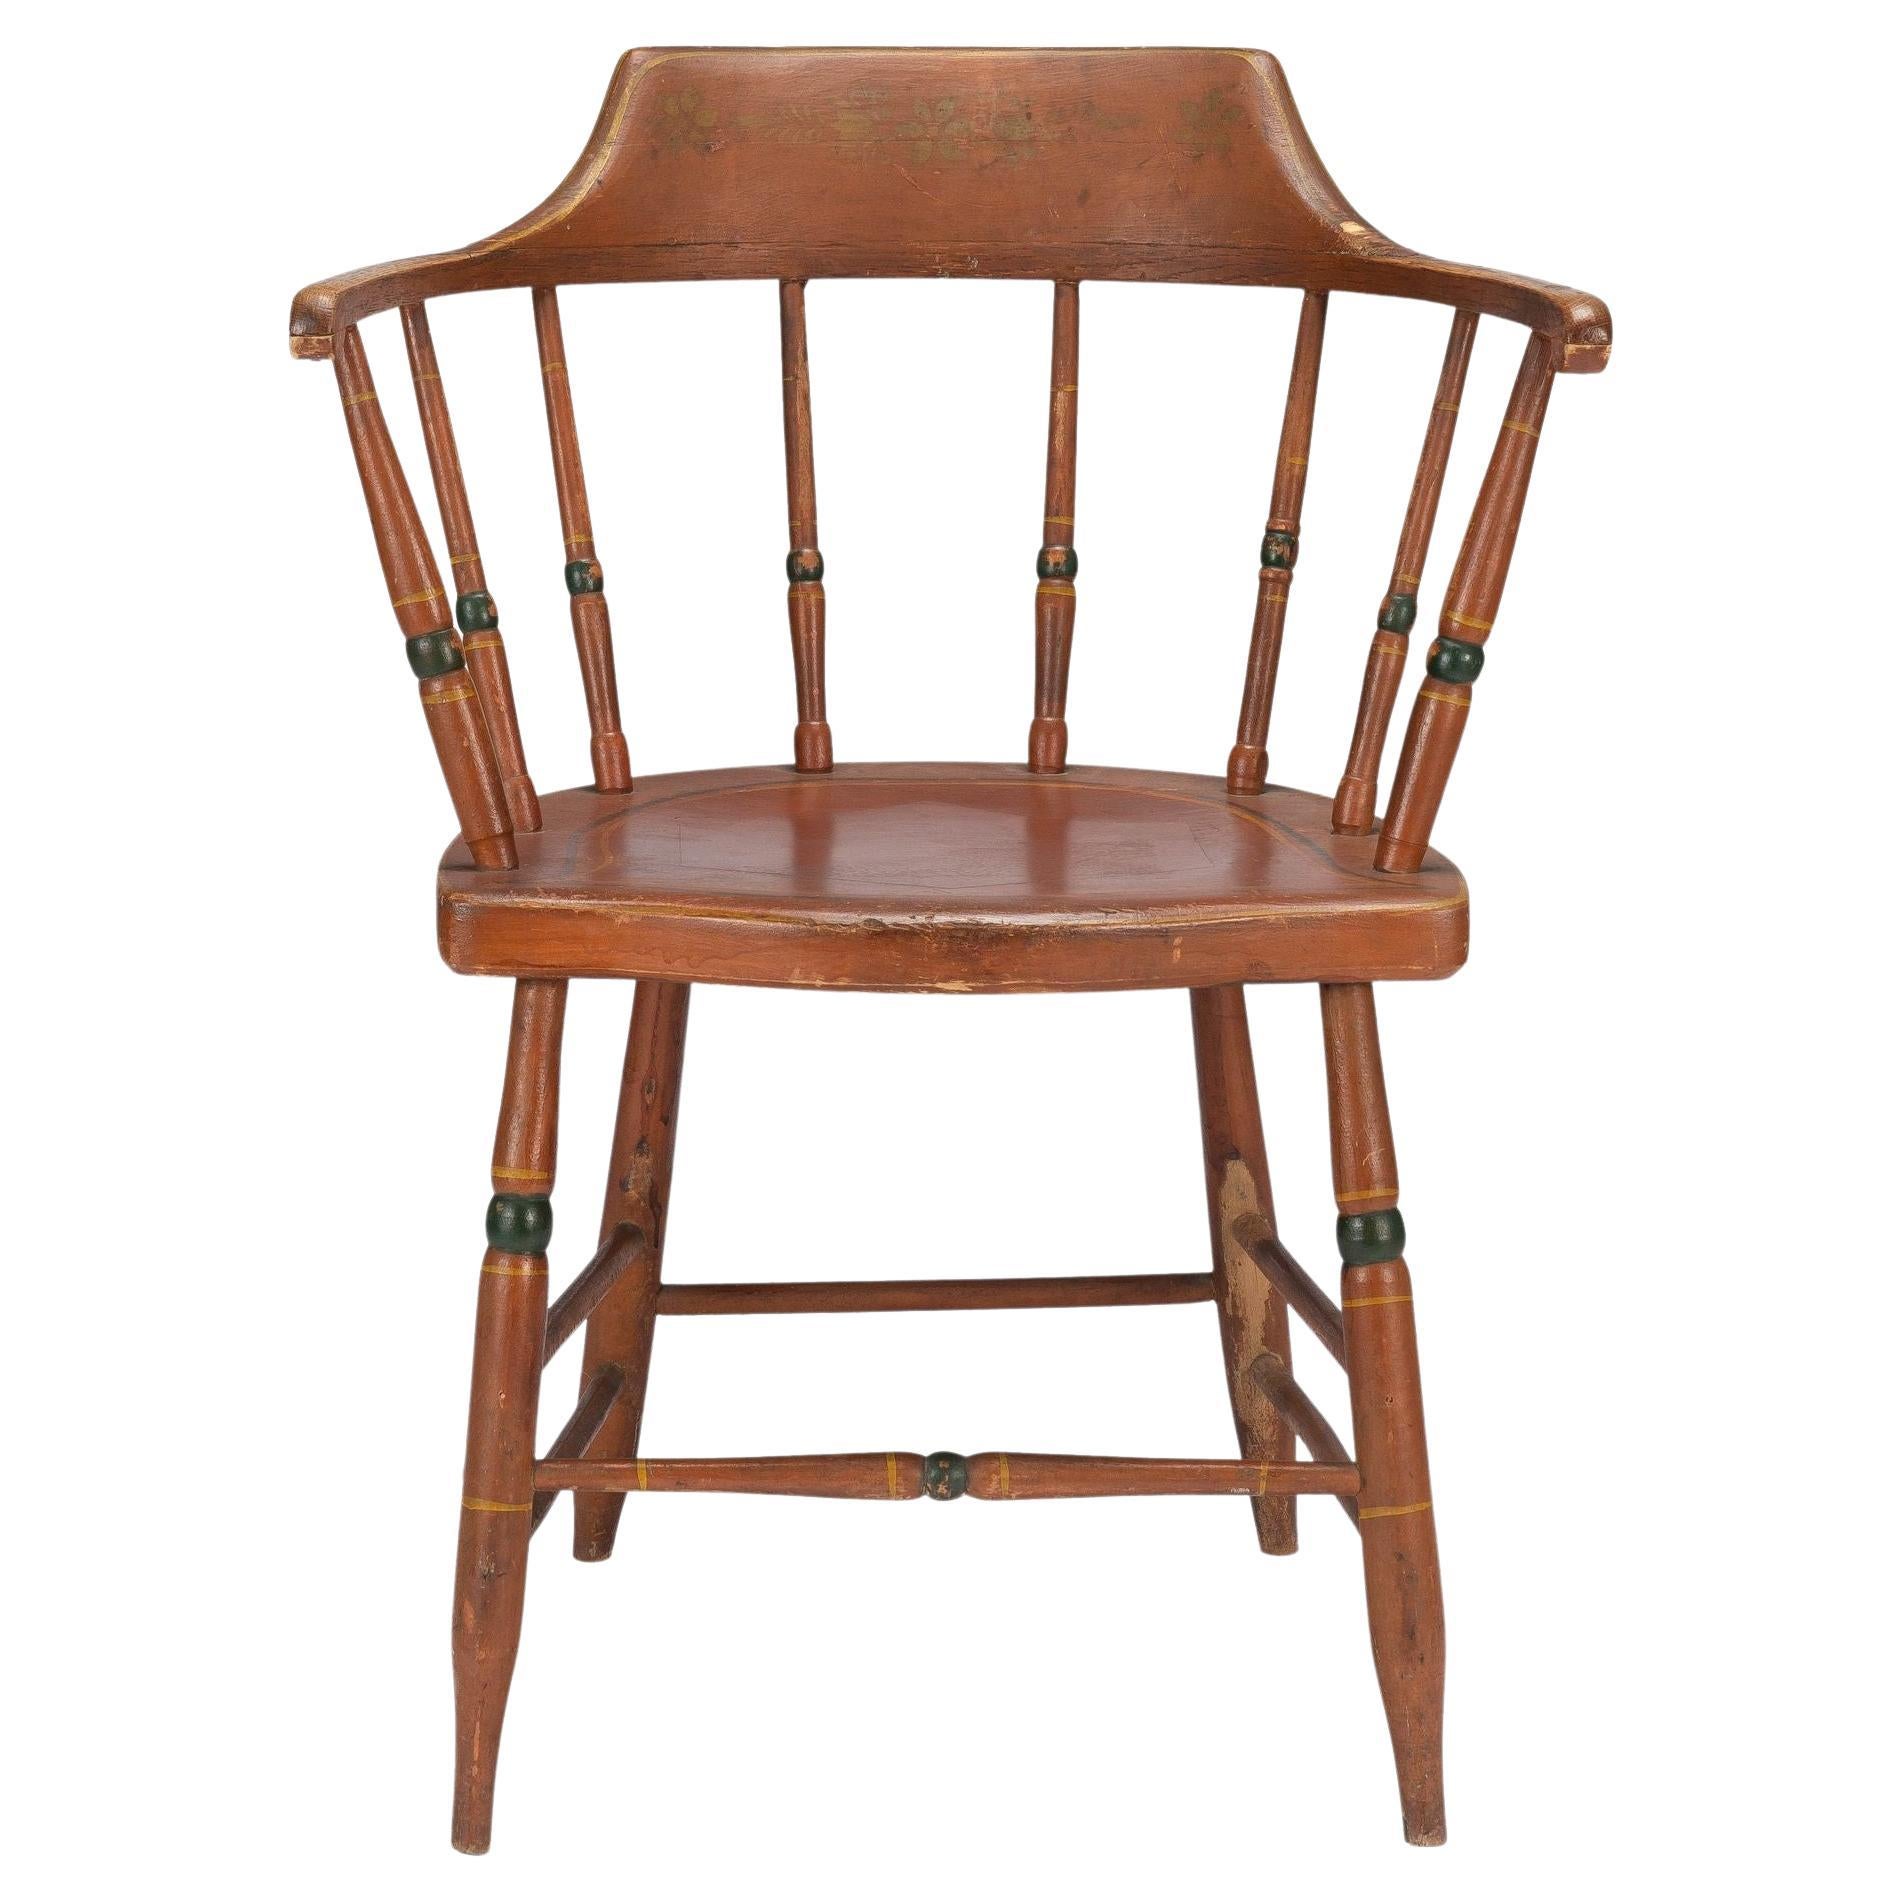 American Painted Windsor Captain's Chair, c. 1820